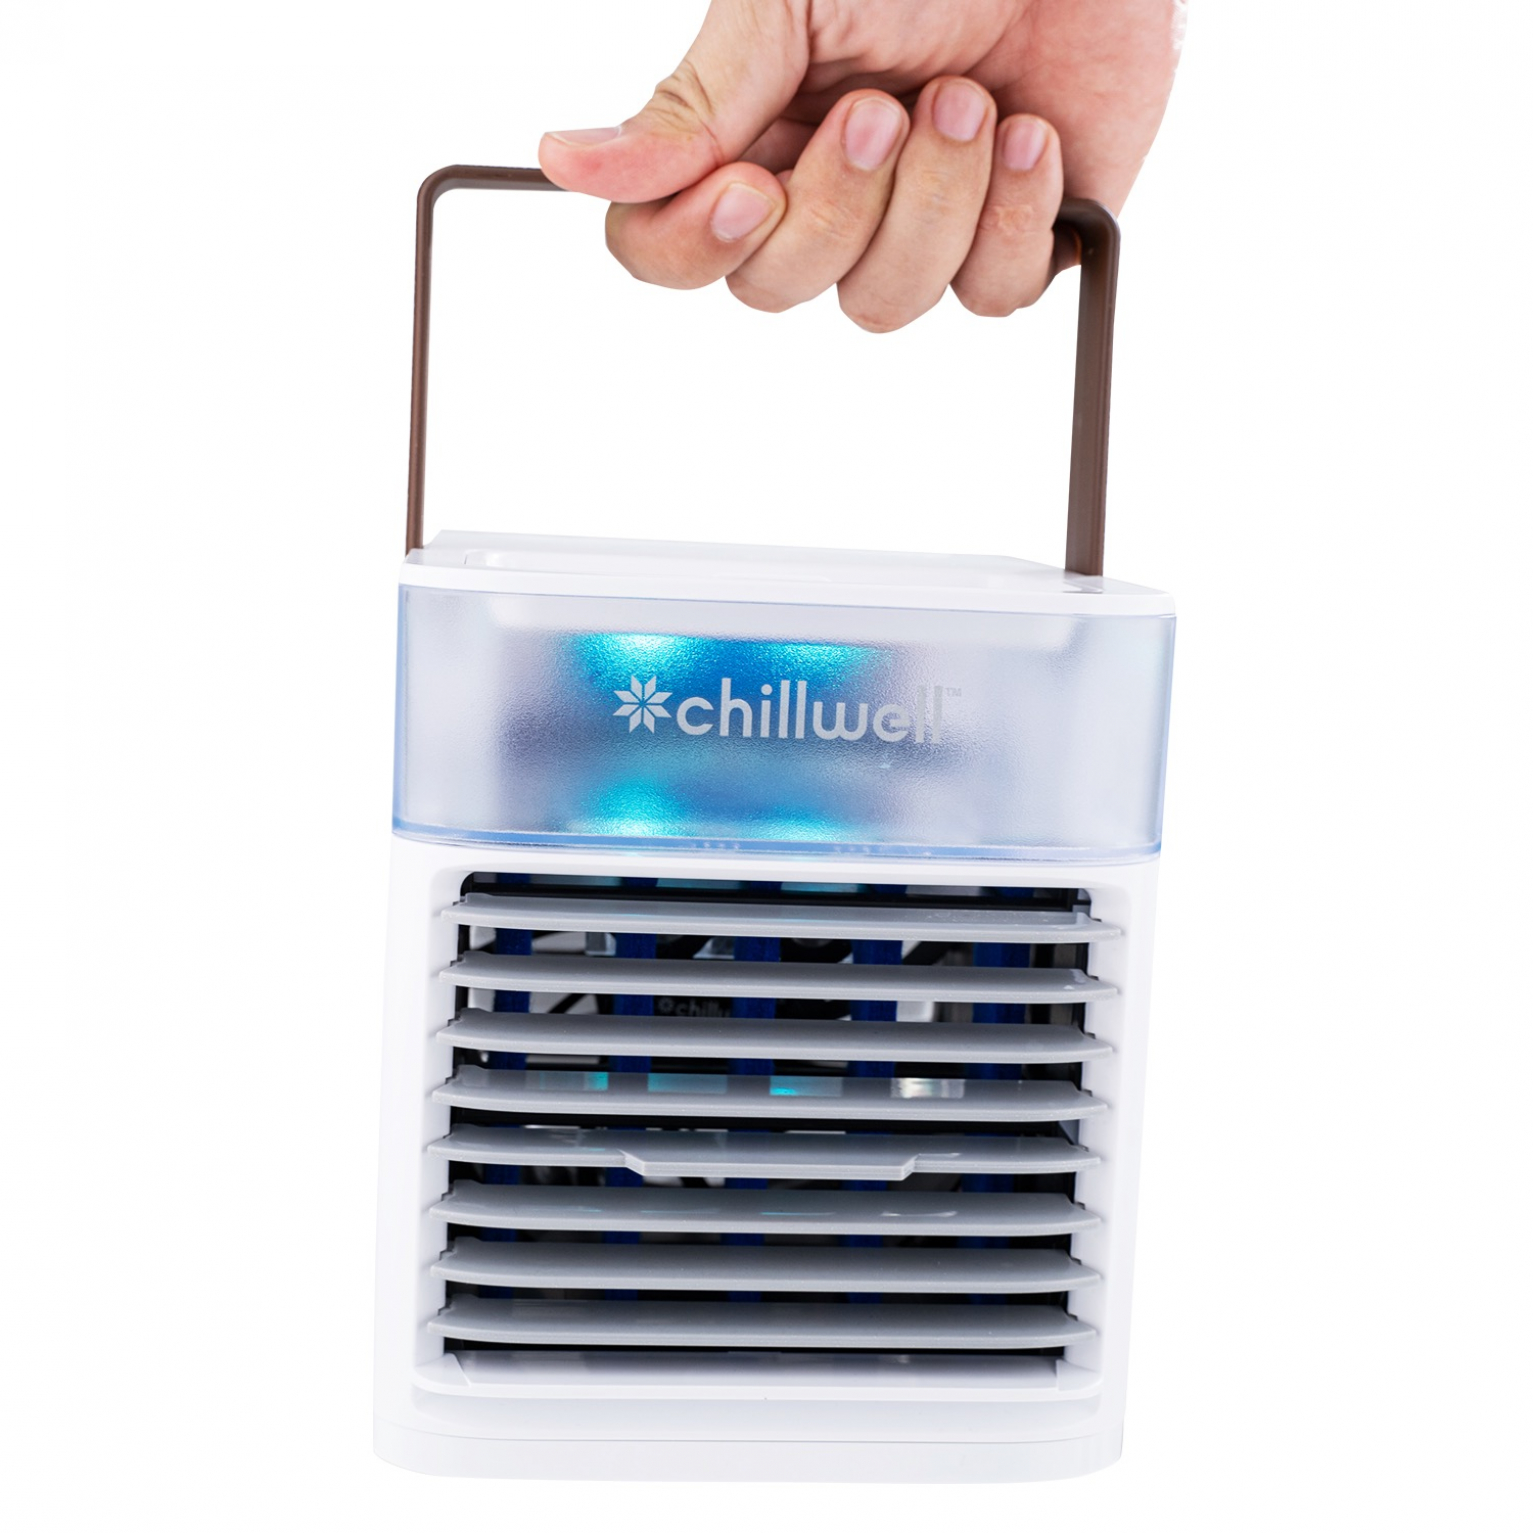 Chillwell Ac Portable Ac Unit Reviews